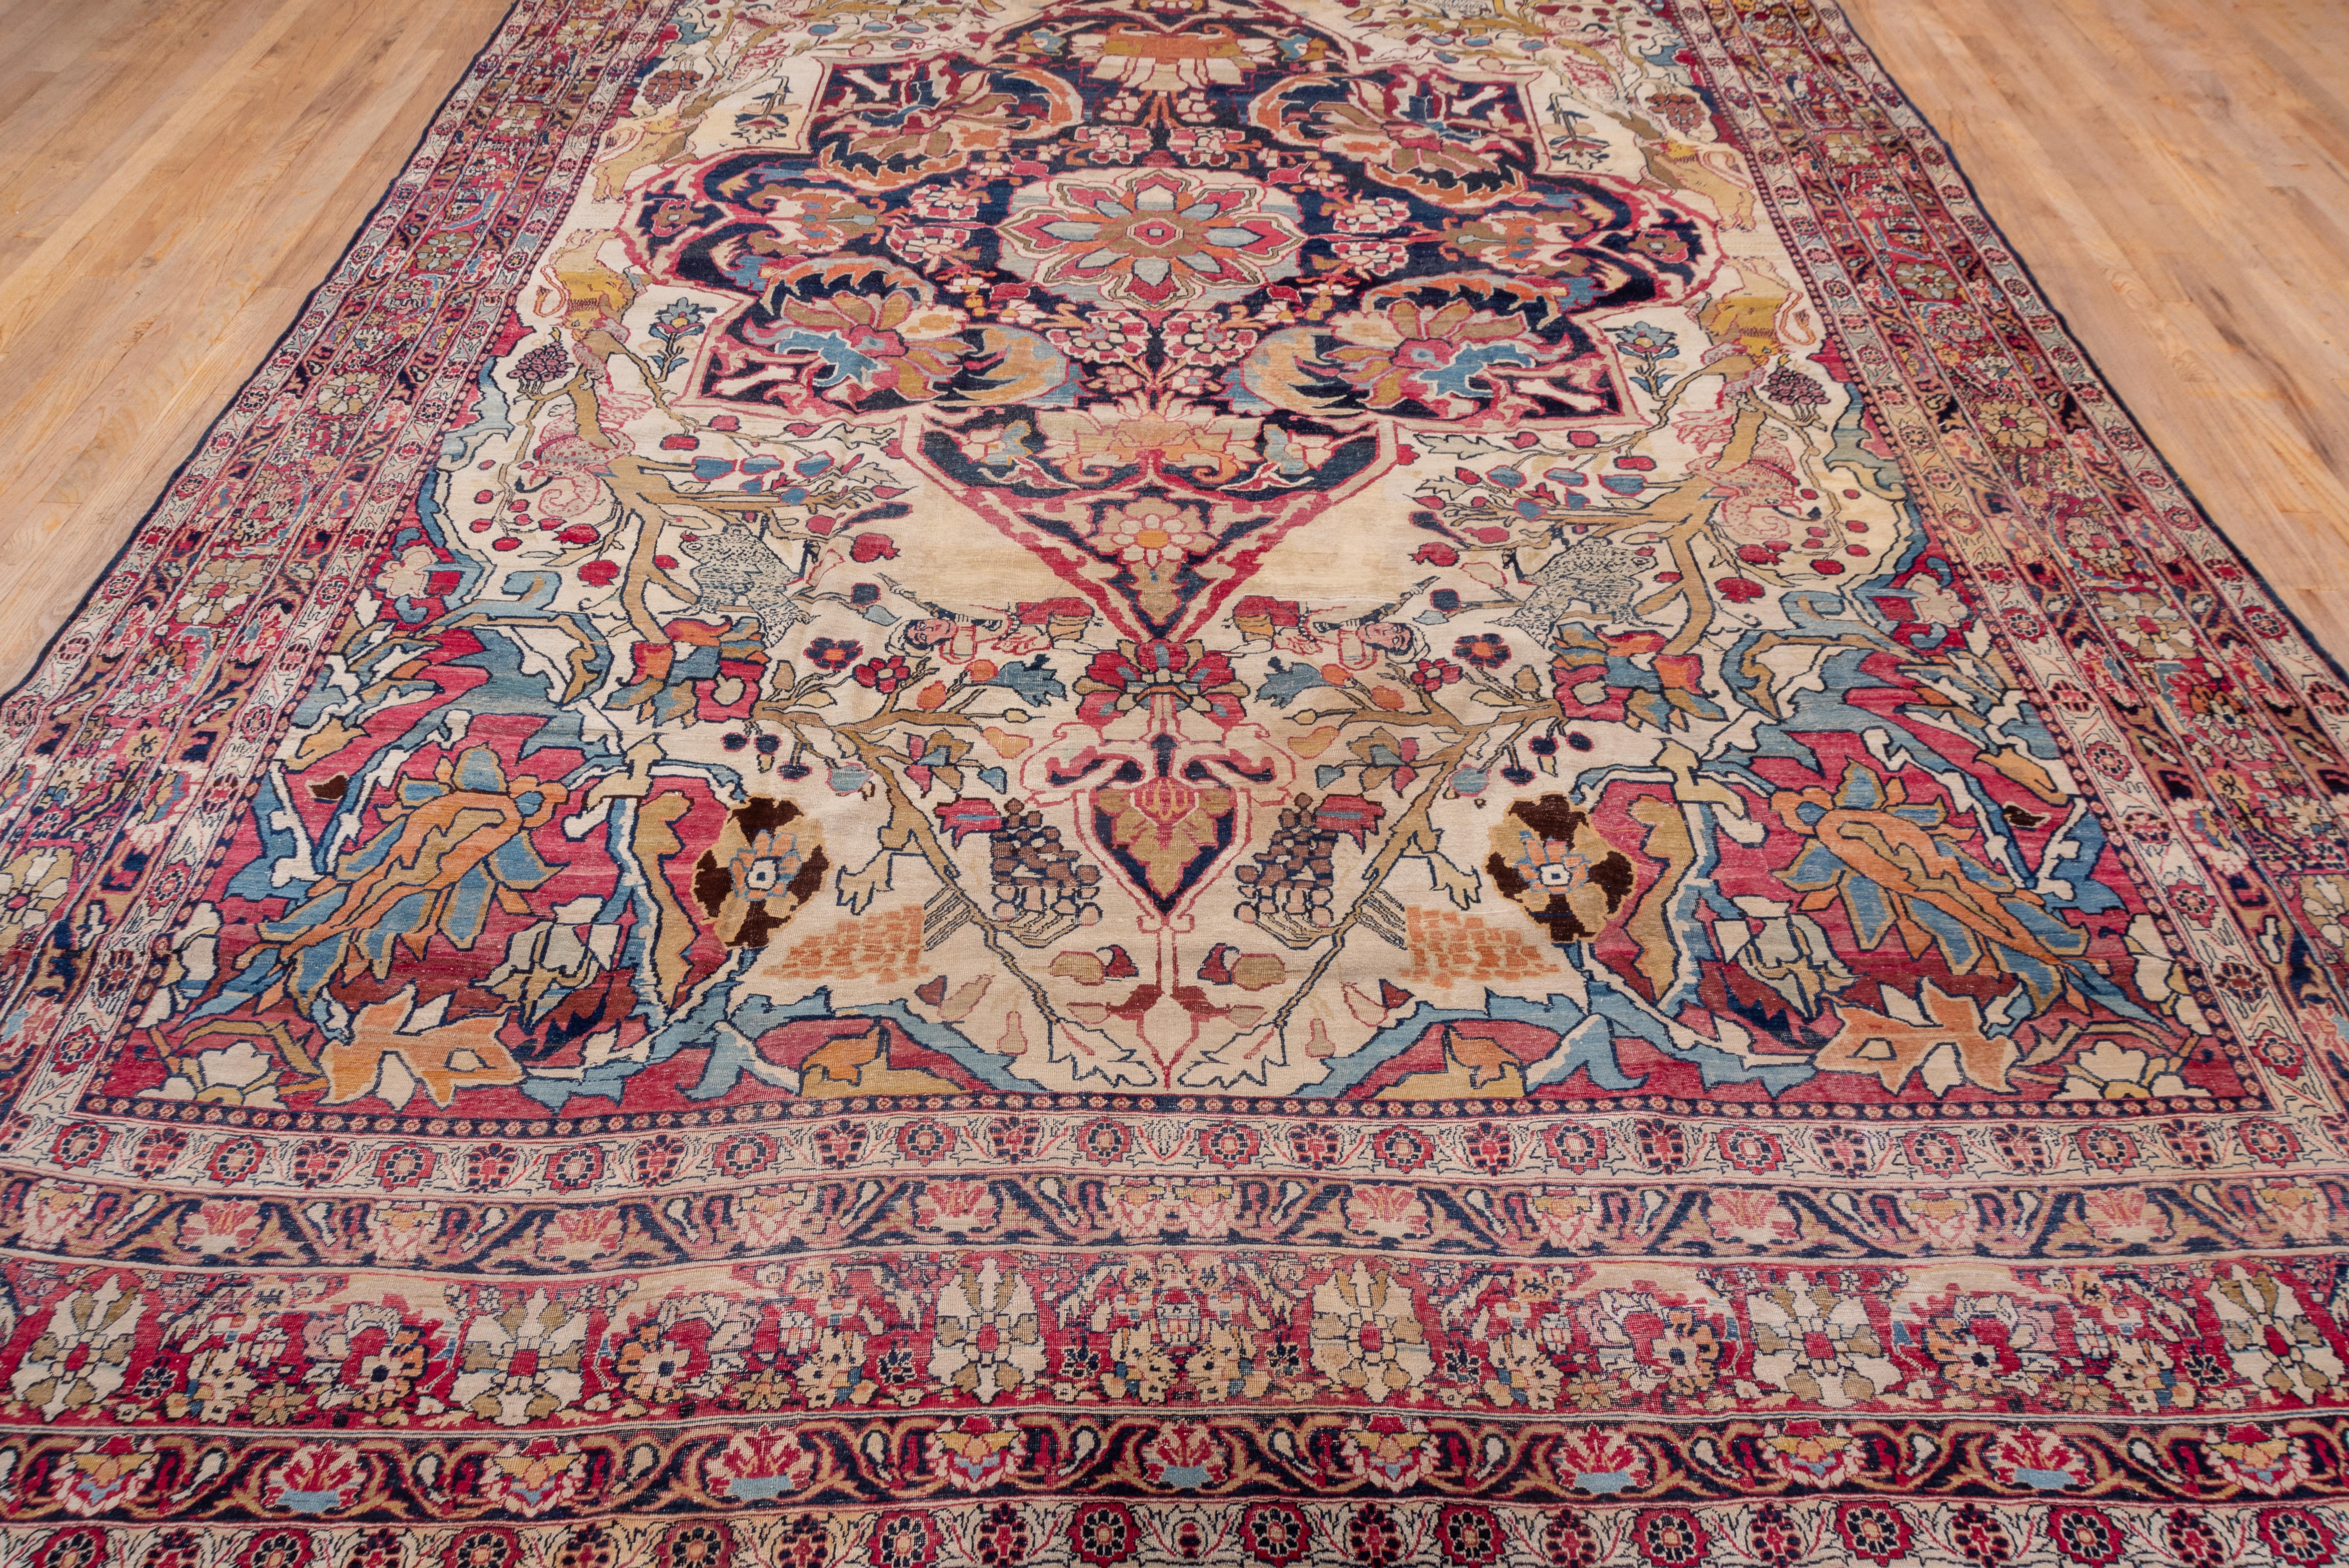 Hand-Knotted Rare Antique Persian Lavar Kerman Carpet, Colorful Outer Border and Accents